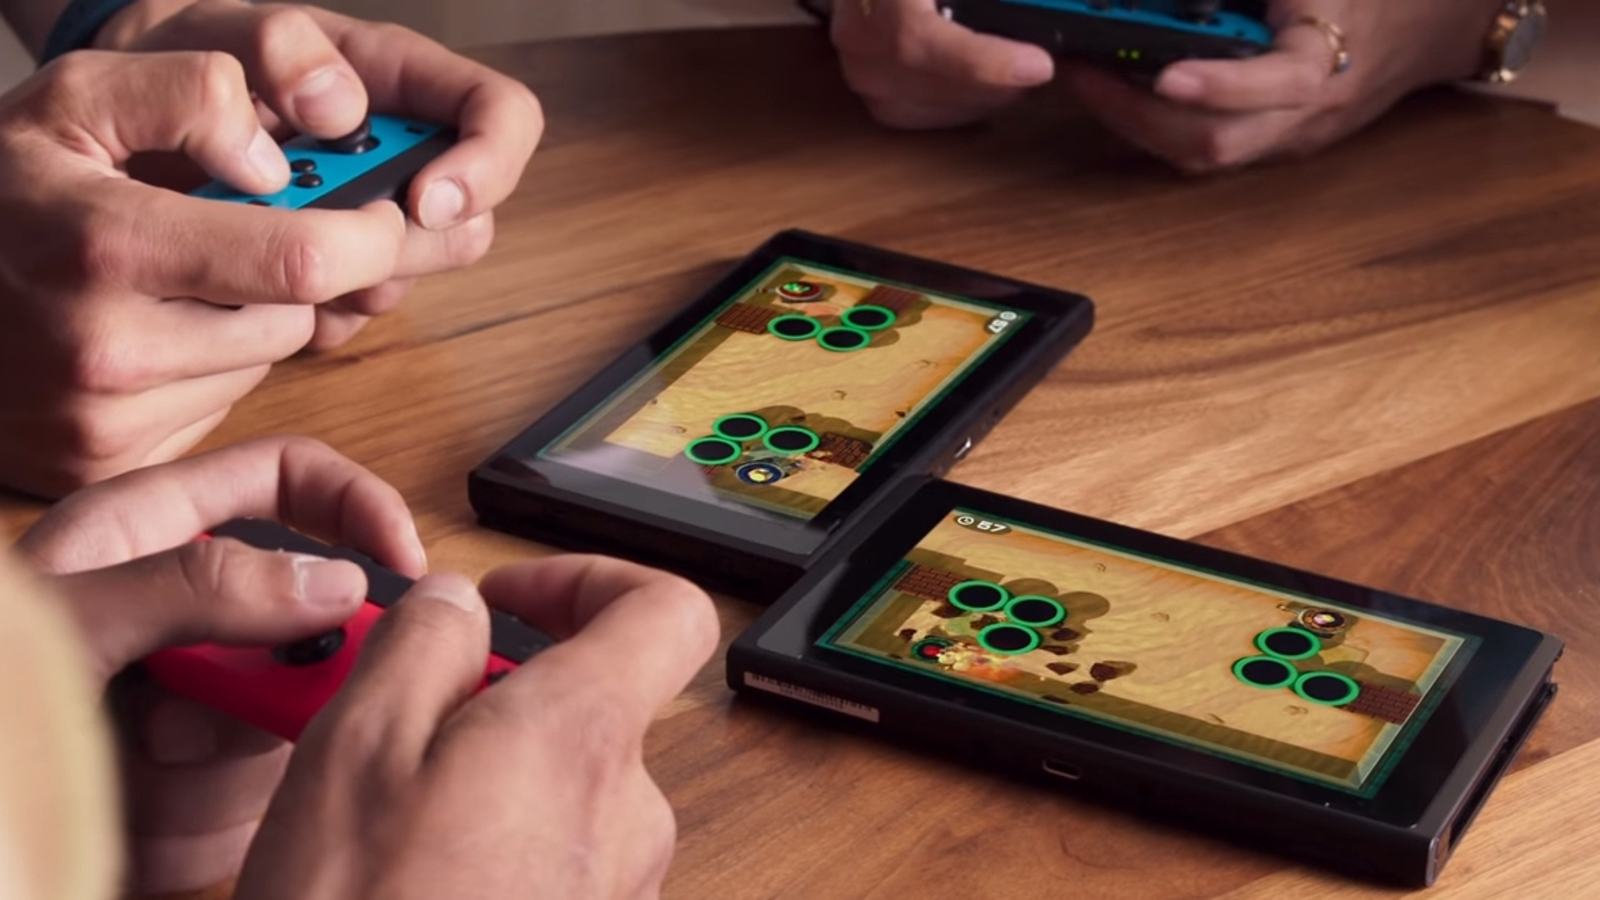 Super Mario Party's use of two Switch screens is a technological